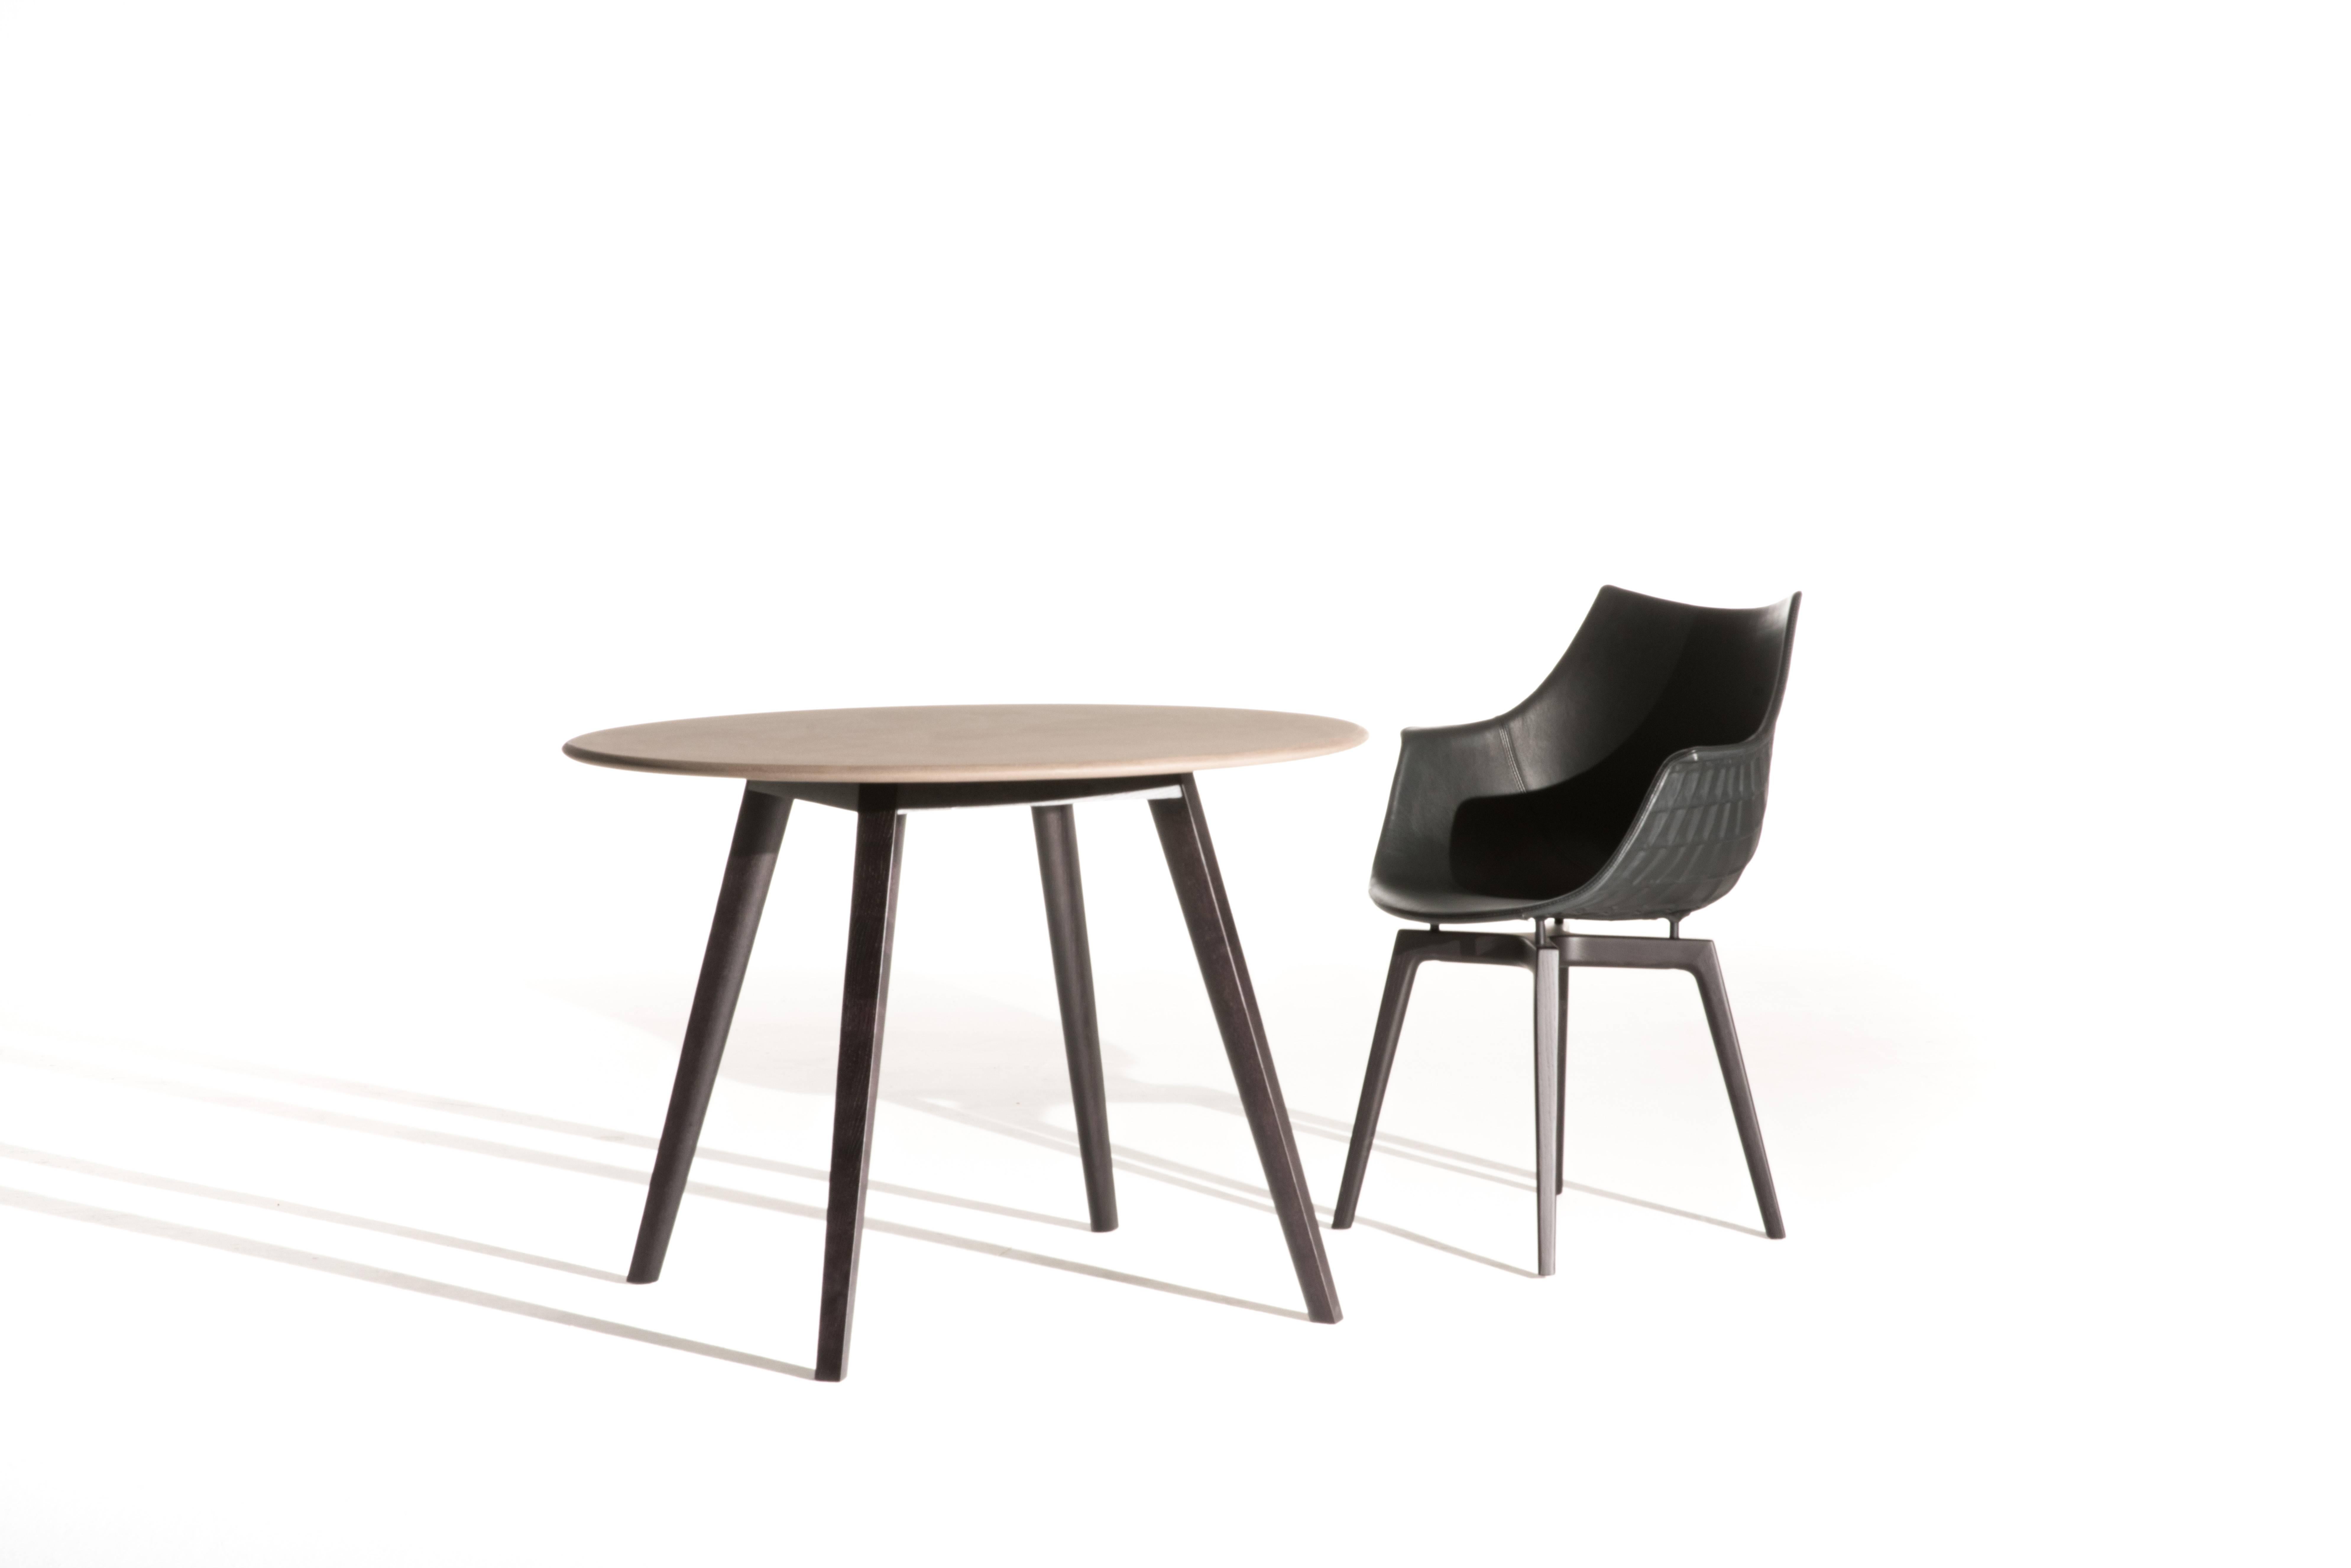 The Meridiana table stems from the ultimate globetrotter chair, revised this year with solid wooden legs. An archetype of the coffee shop or domestic table, it displays a precious balance between the round, wood particleboard top and the solid wood